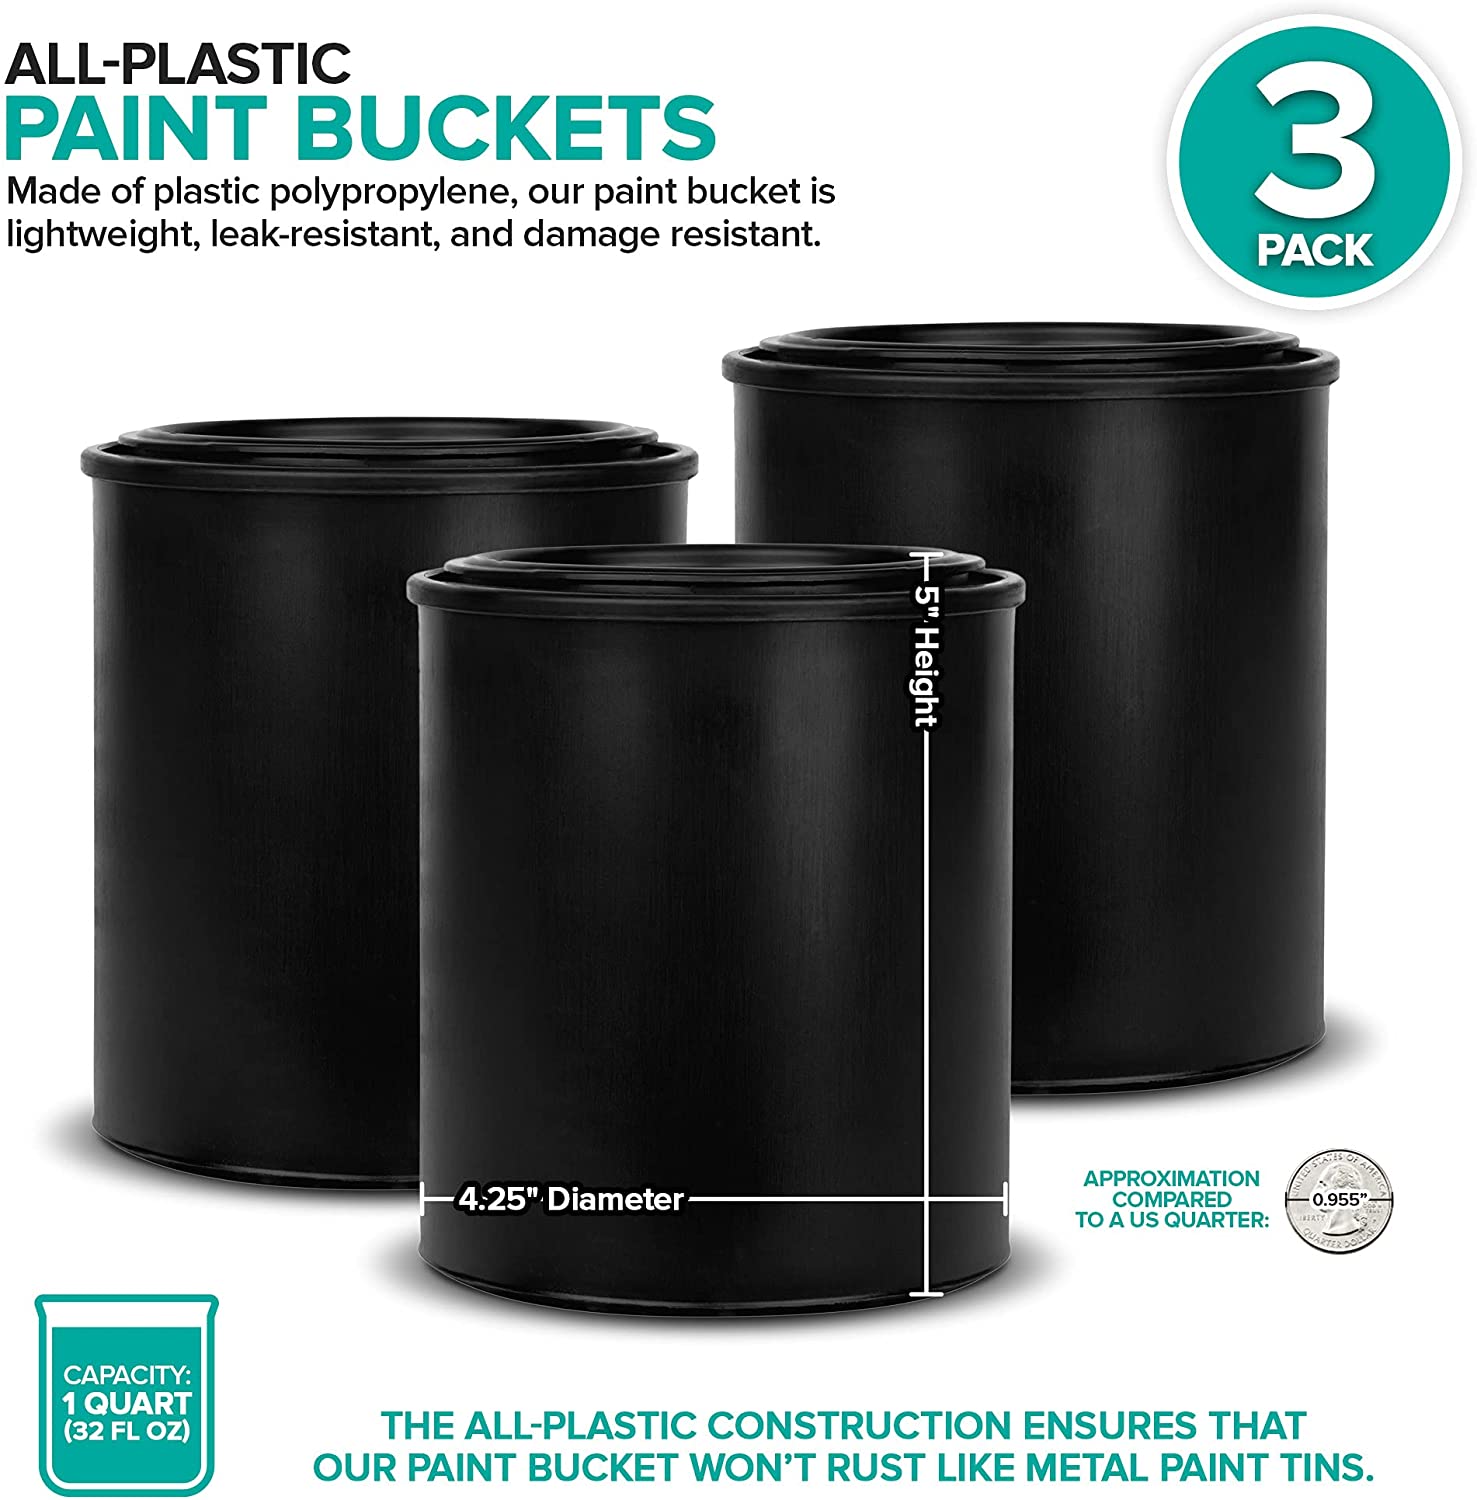 2 Gallon Square Bucket with Snap On Lid